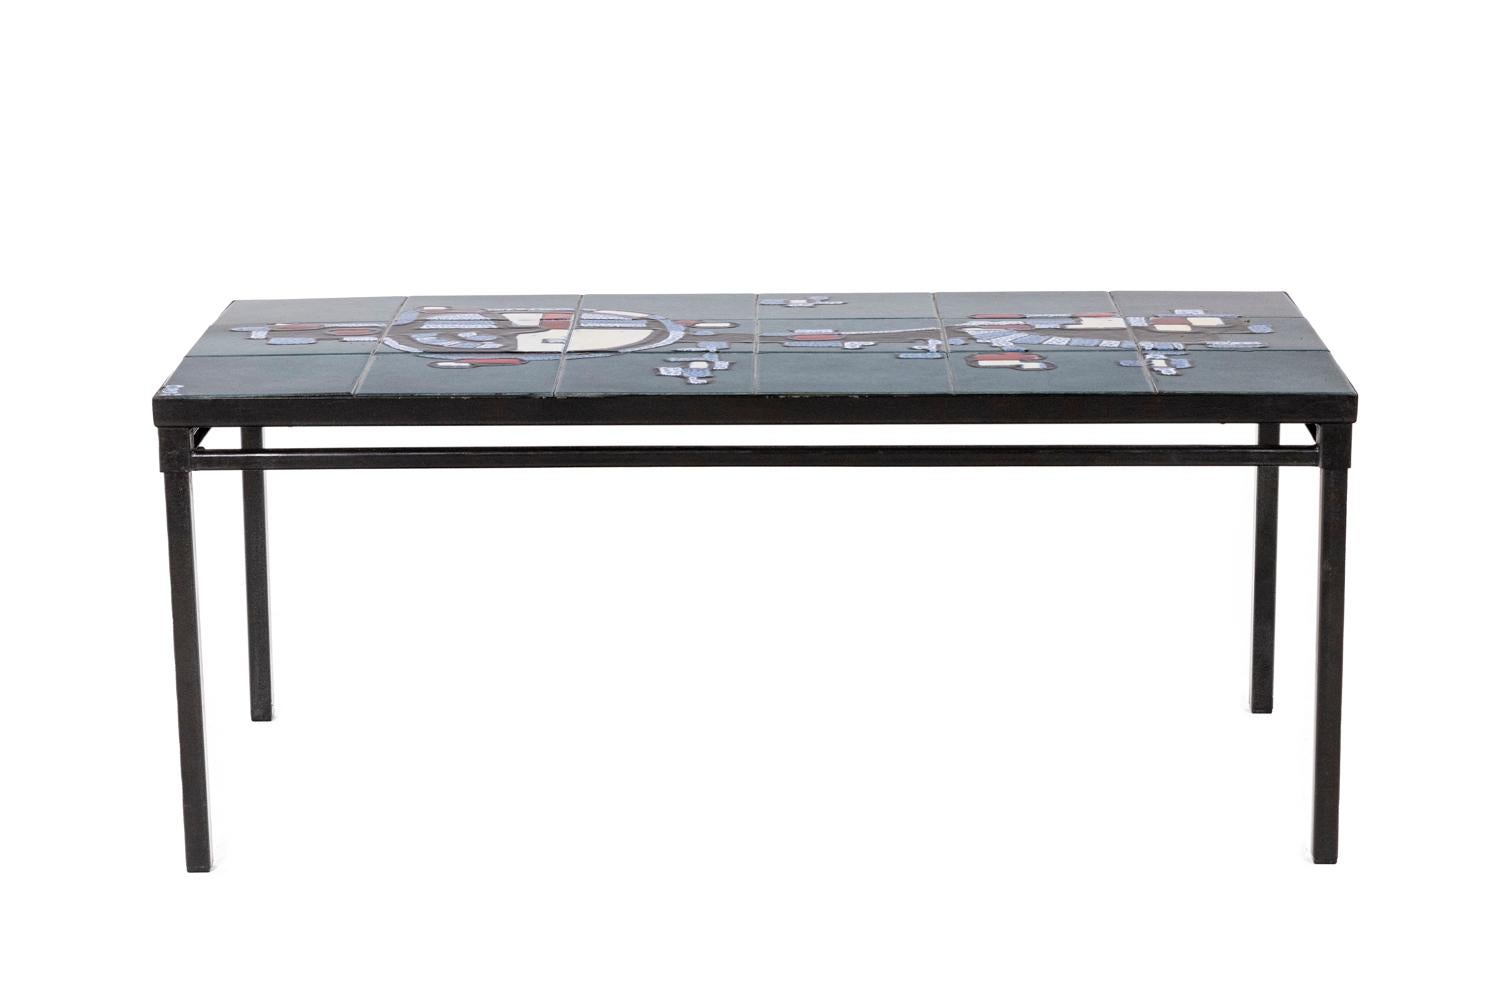 Coffee table. Tray in ceramic, abstract but suggesting a character. Base in black lacquered iron.

French work realized in the 1950s.